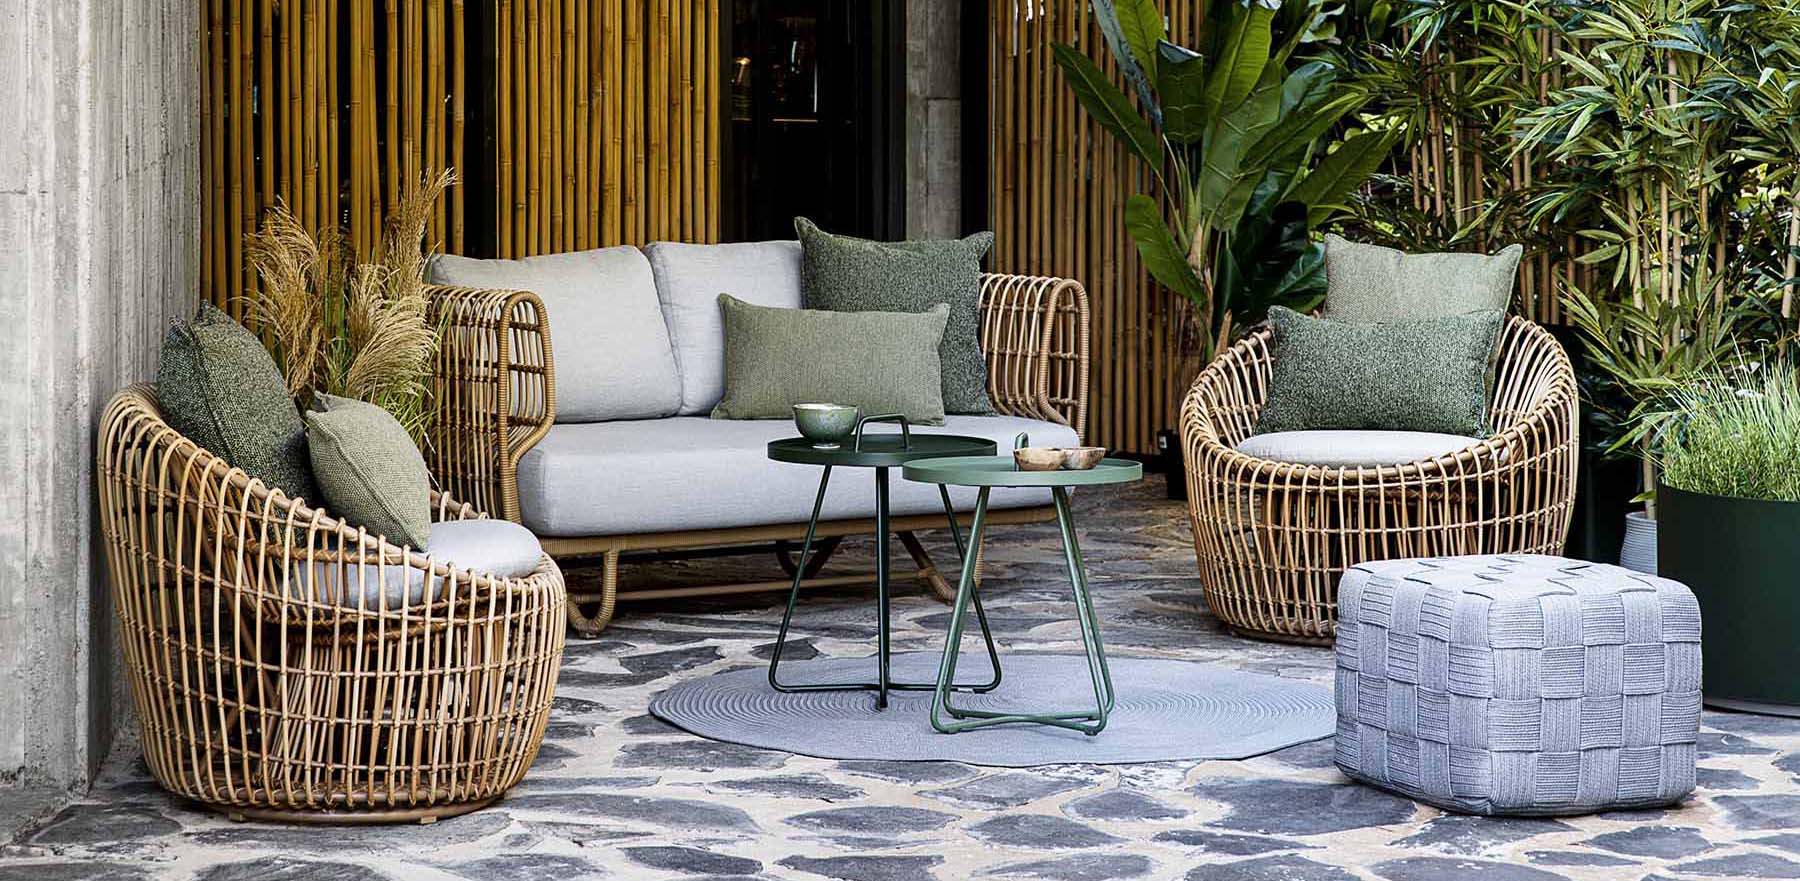 Cane-Line Nest Outdoor Collection Lifestyle Image